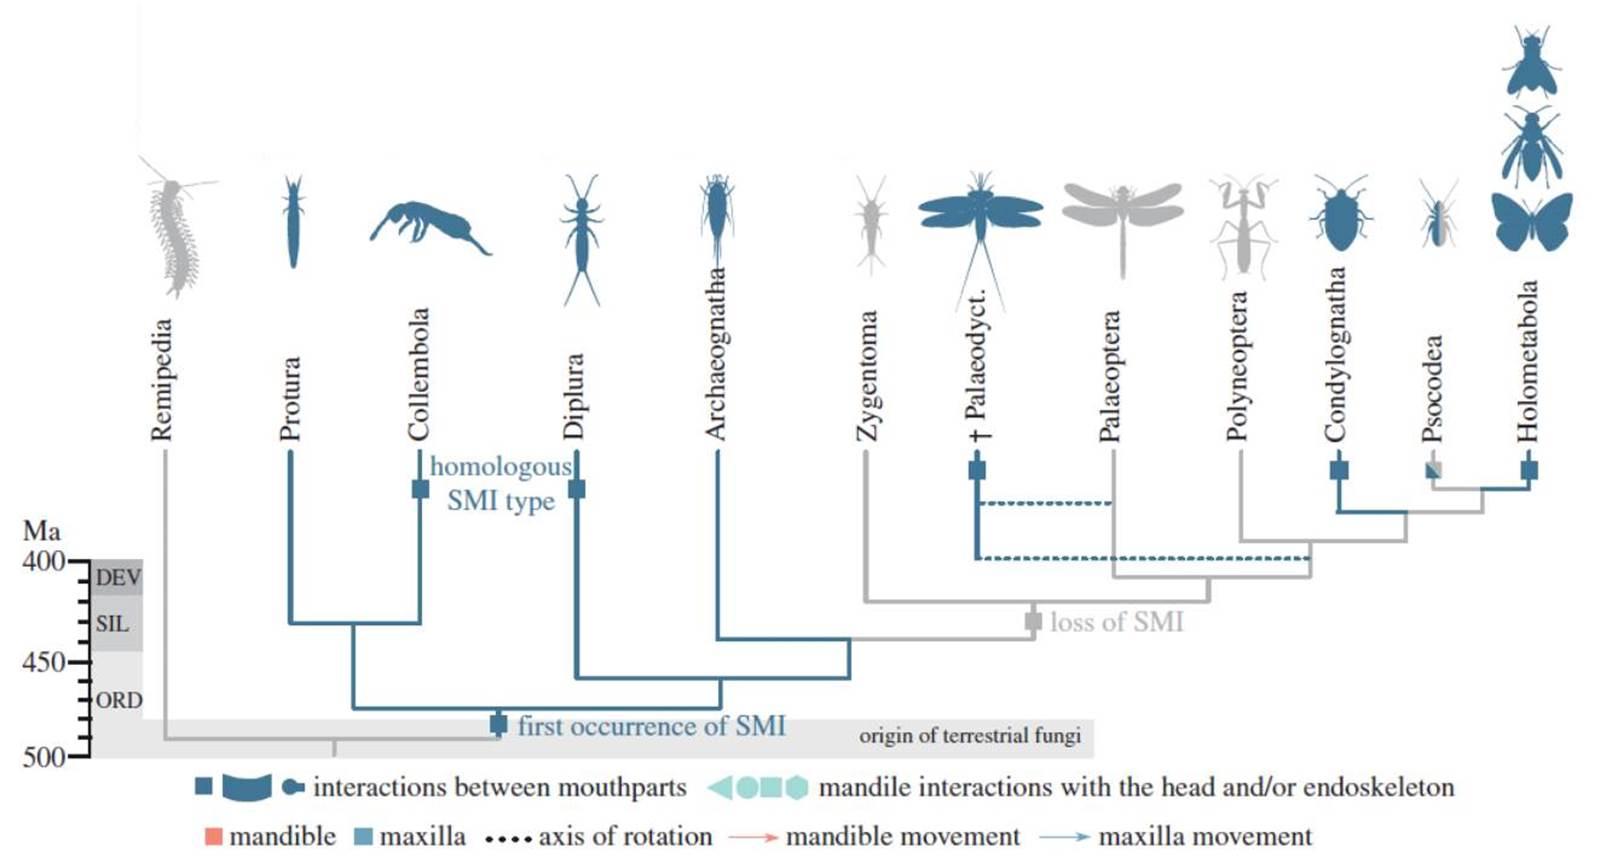 Evolution of structural mouthpart interactions in insects mapped on a transcriptome-based phylogenetic tree and divergence time estimates